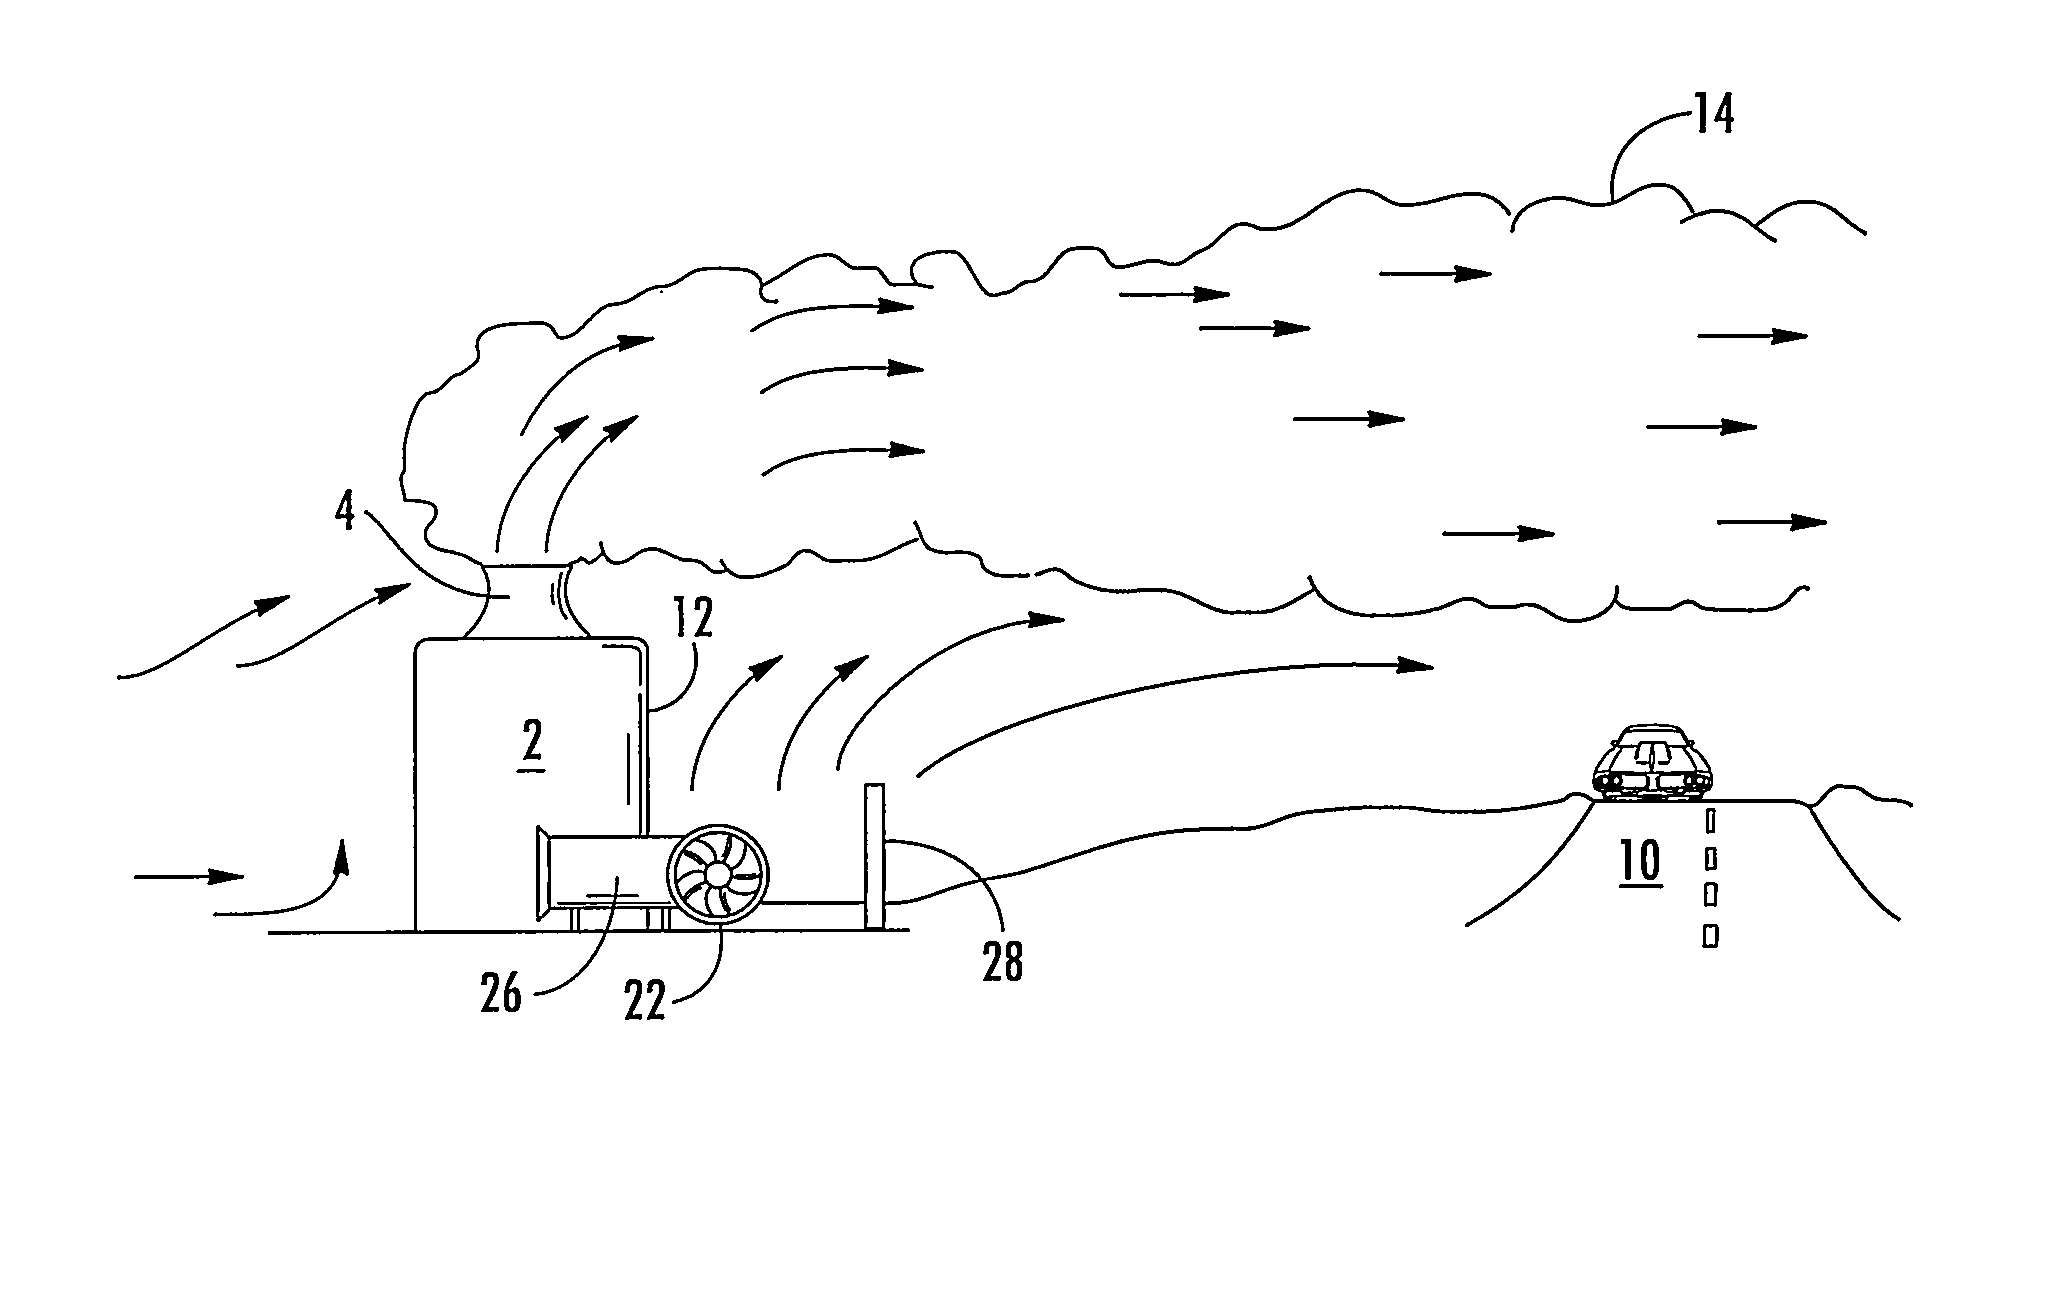 Method of reducing downward flow of air currents on the lee side of exterior structures